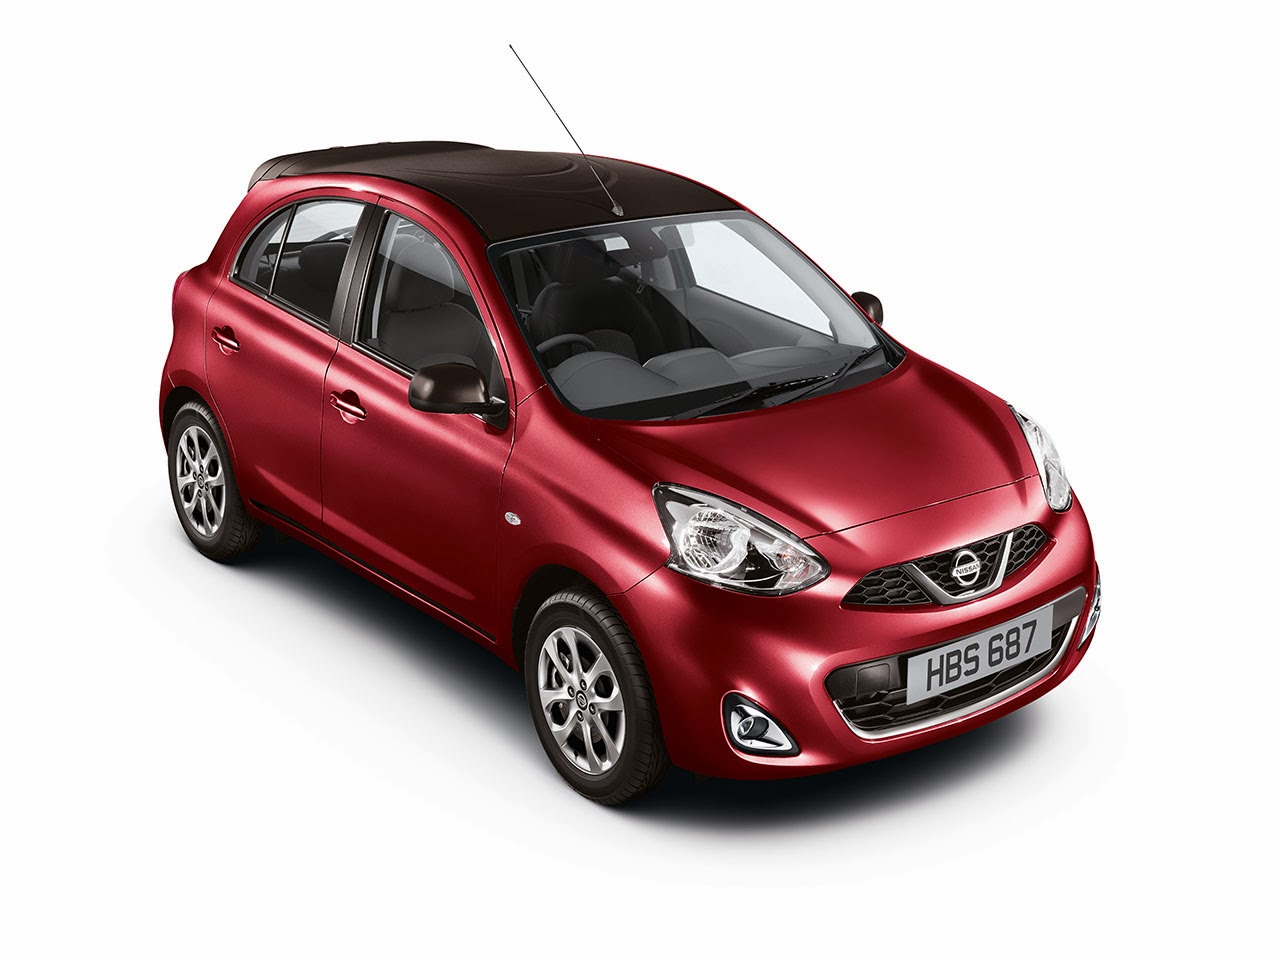 Nissan launches the limited edition new Micra